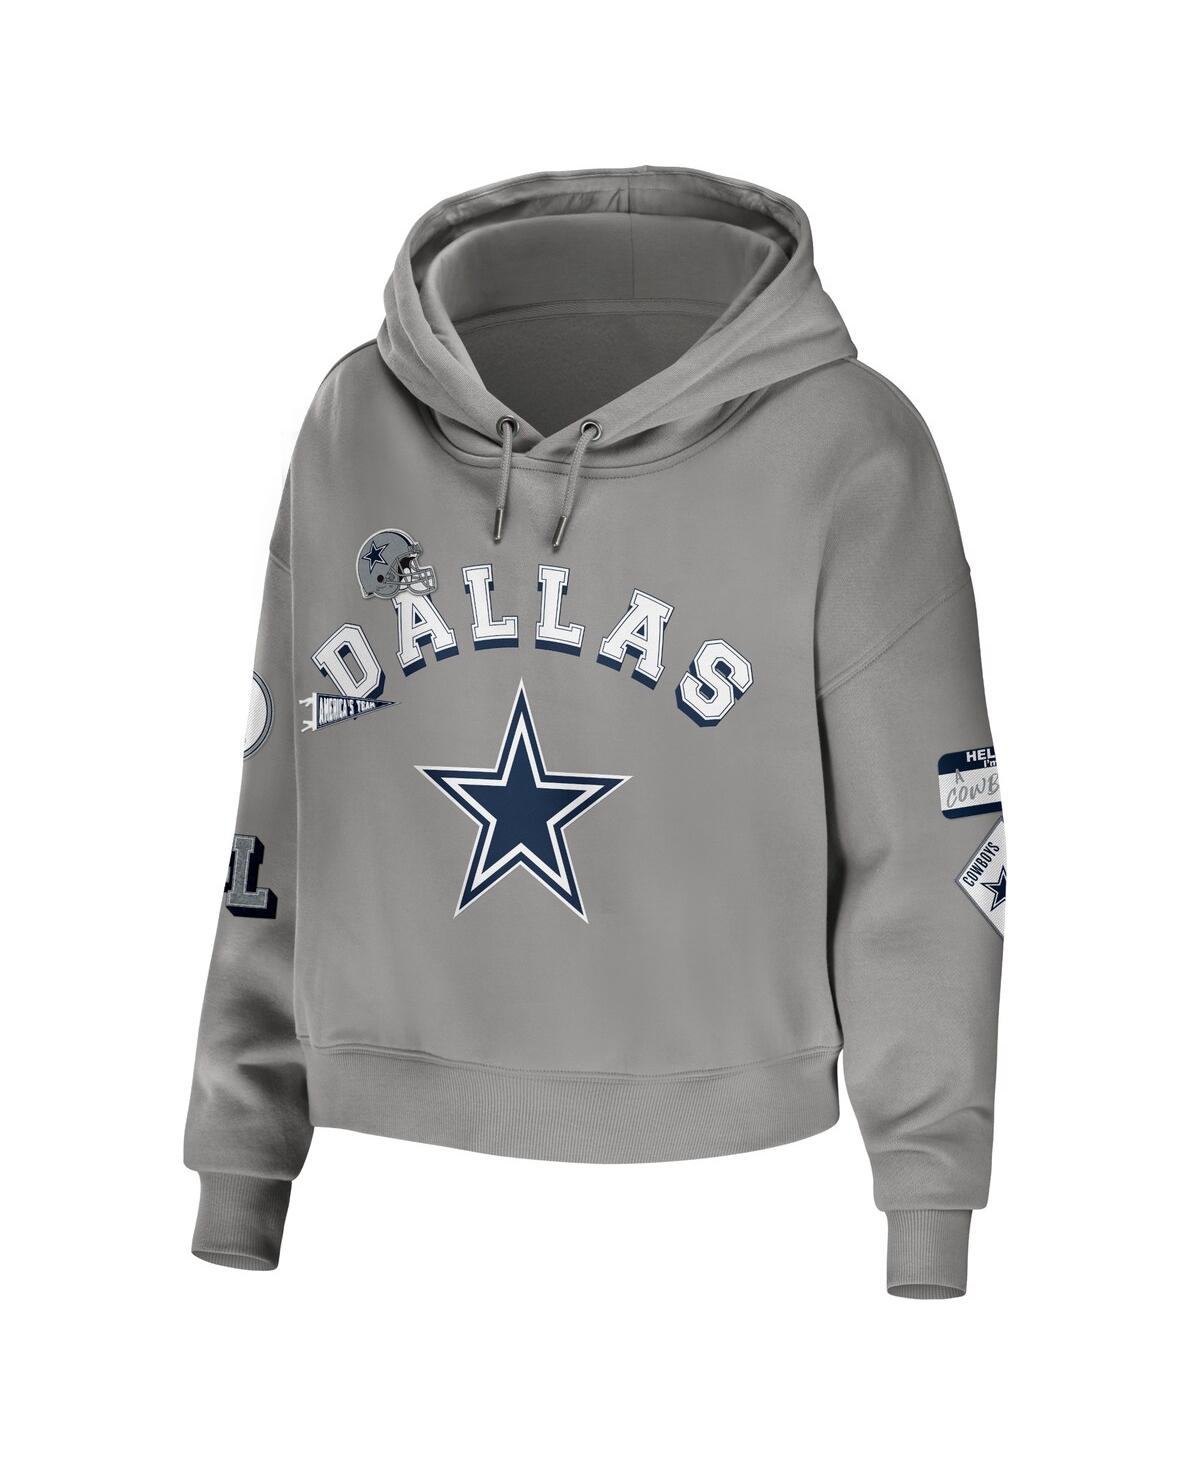 Shop Wear By Erin Andrews Women's  Gray Dallas Cowboys Modest Cropped Pullover Hoodie